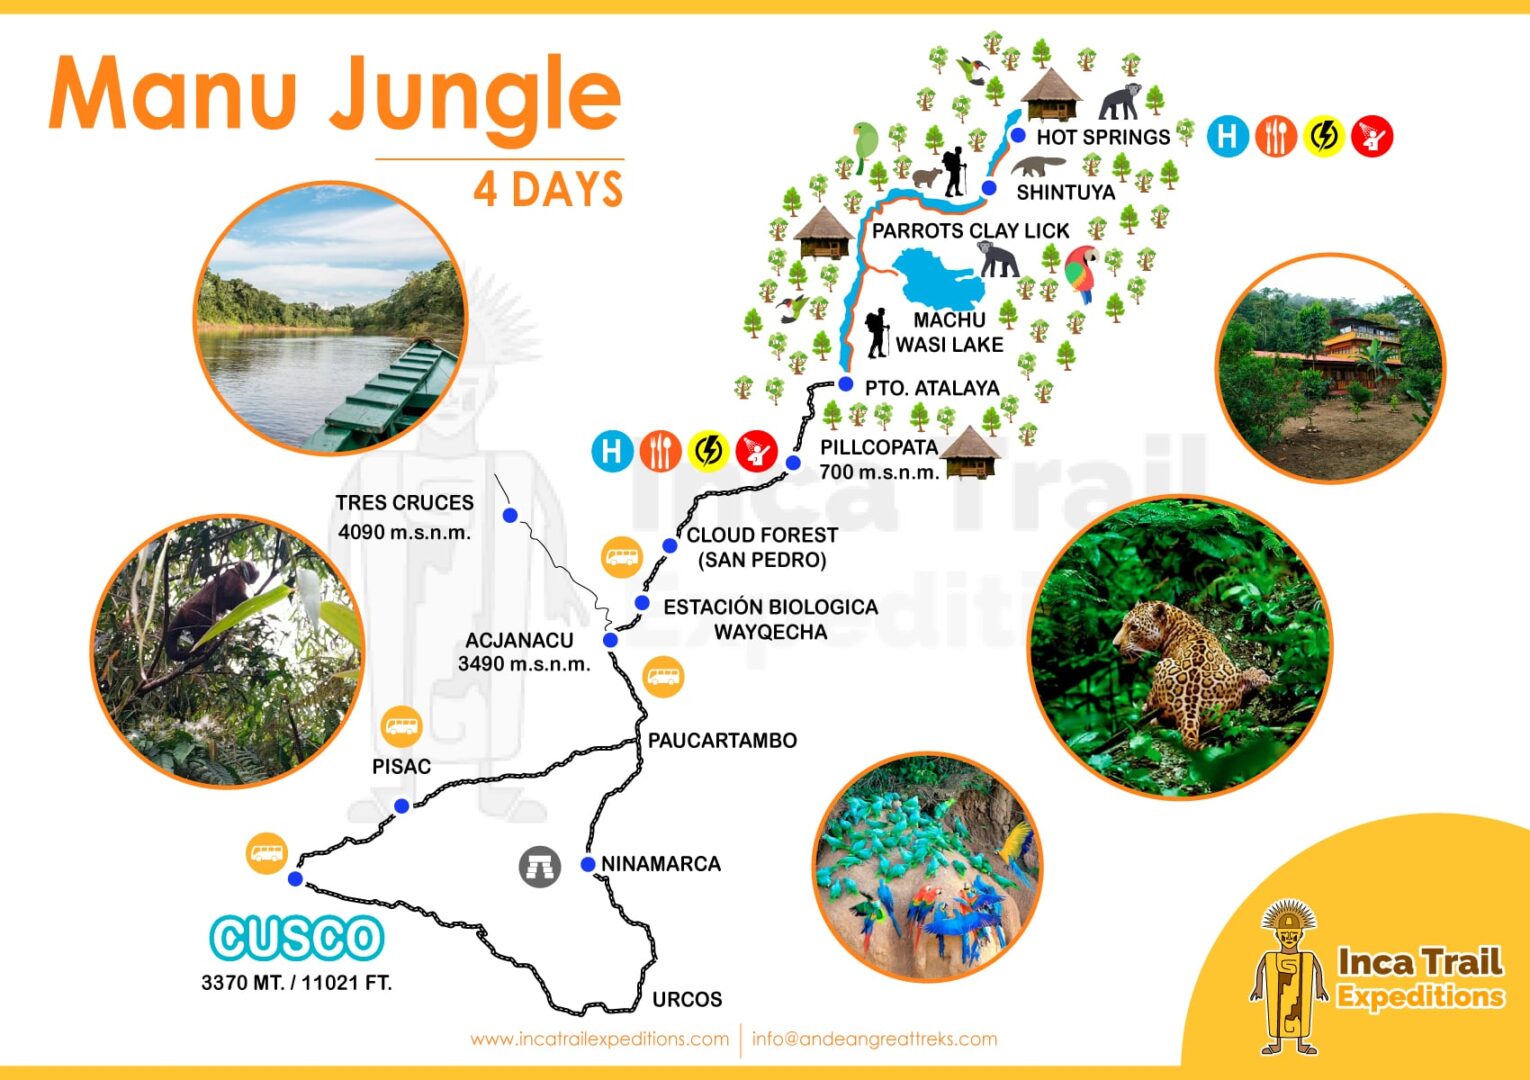 MANU-JUNGLE-4-DAYS-BY-INCA-TRAIL-EXPEDITIONS